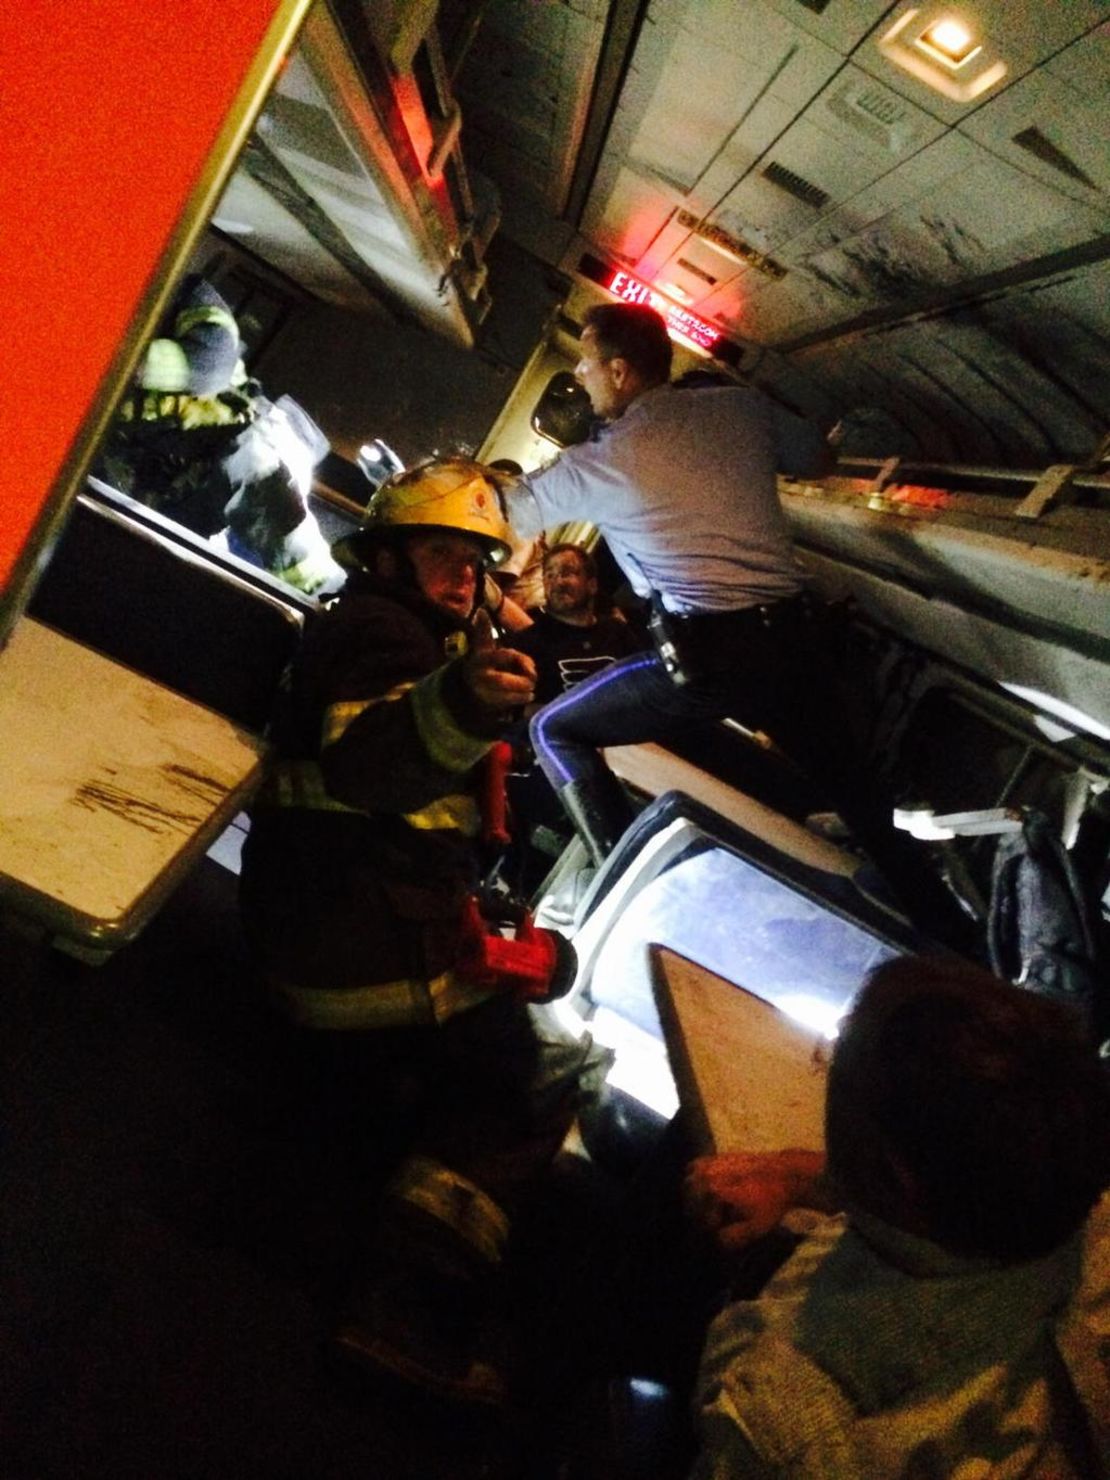 Former U.S. Rep. Patrick Murphy tweeted he was aboard the train when it crashed. "Helping others," he said. "Pray for those injured." Later he shared this photo that showed a firefighter inside the train.